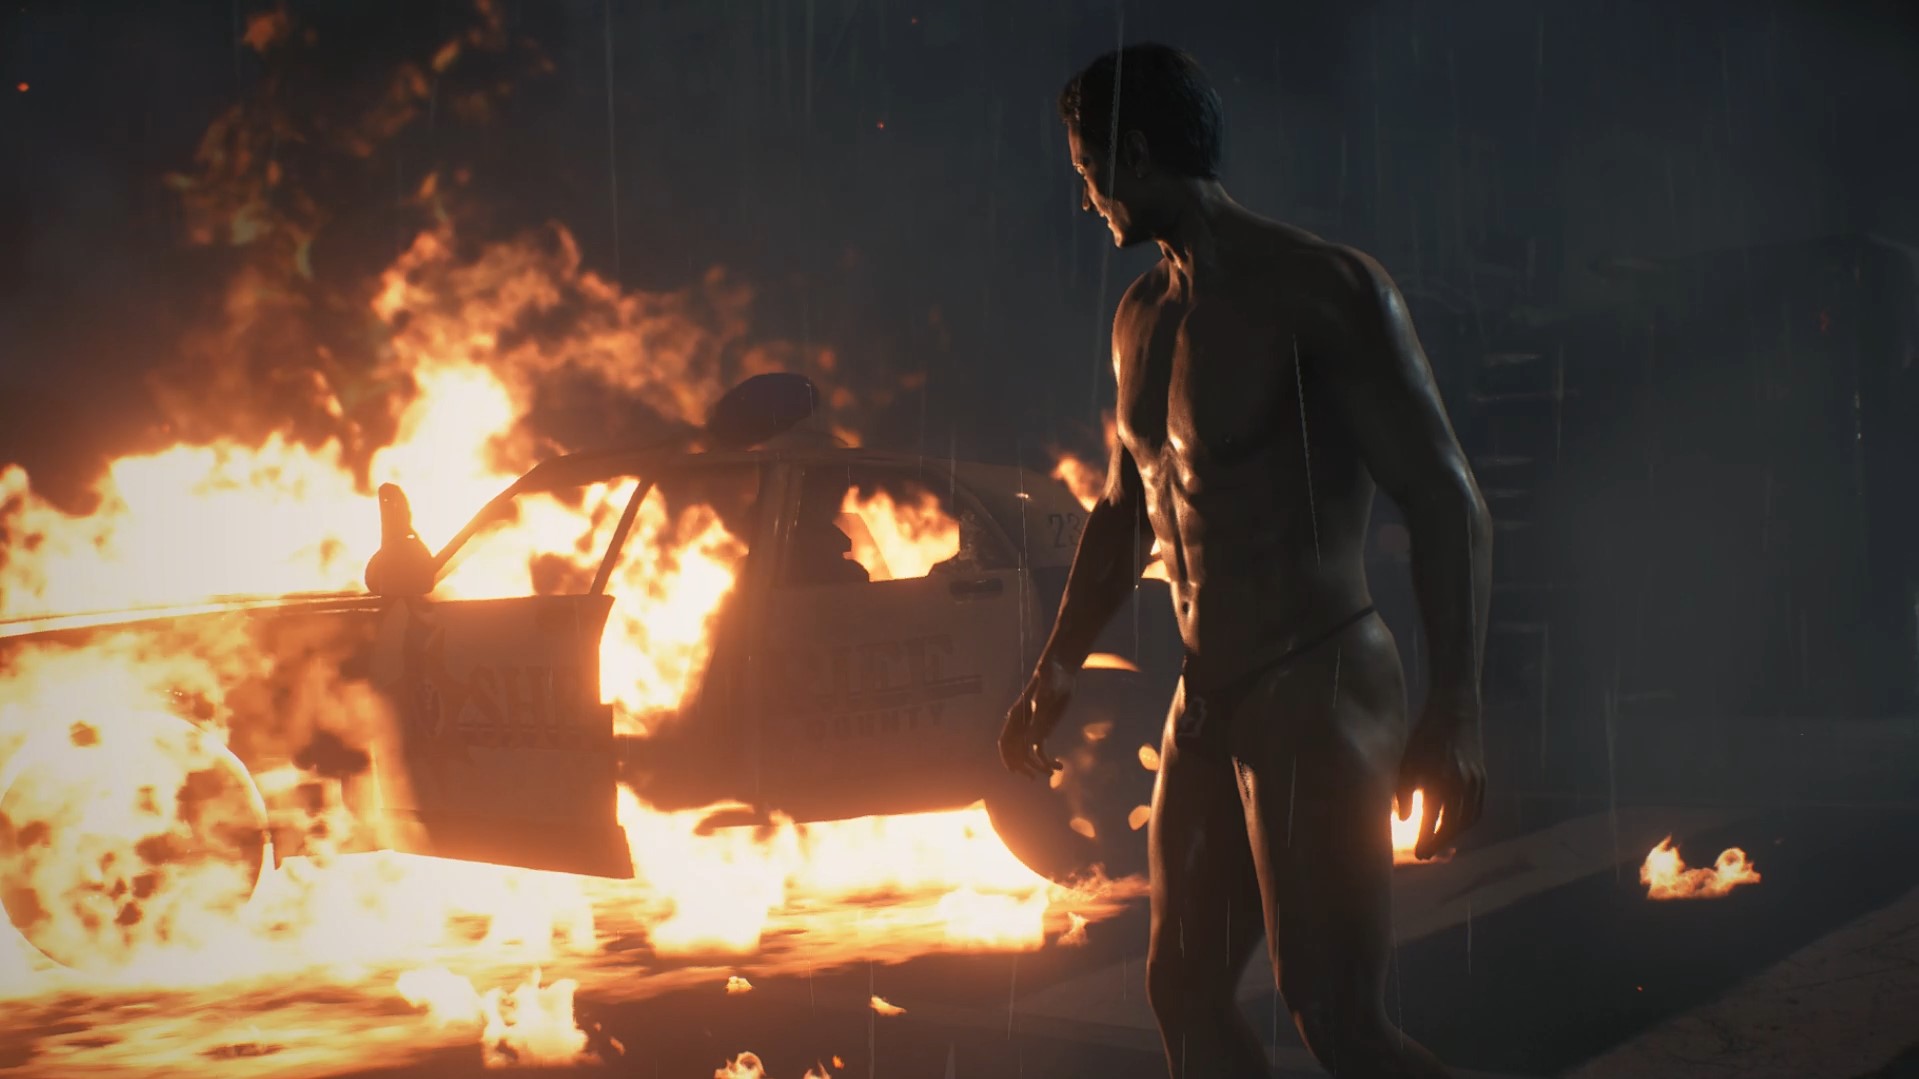 Here's Resident Evil 2's Mr. X In A Thong Thanks To A Mod